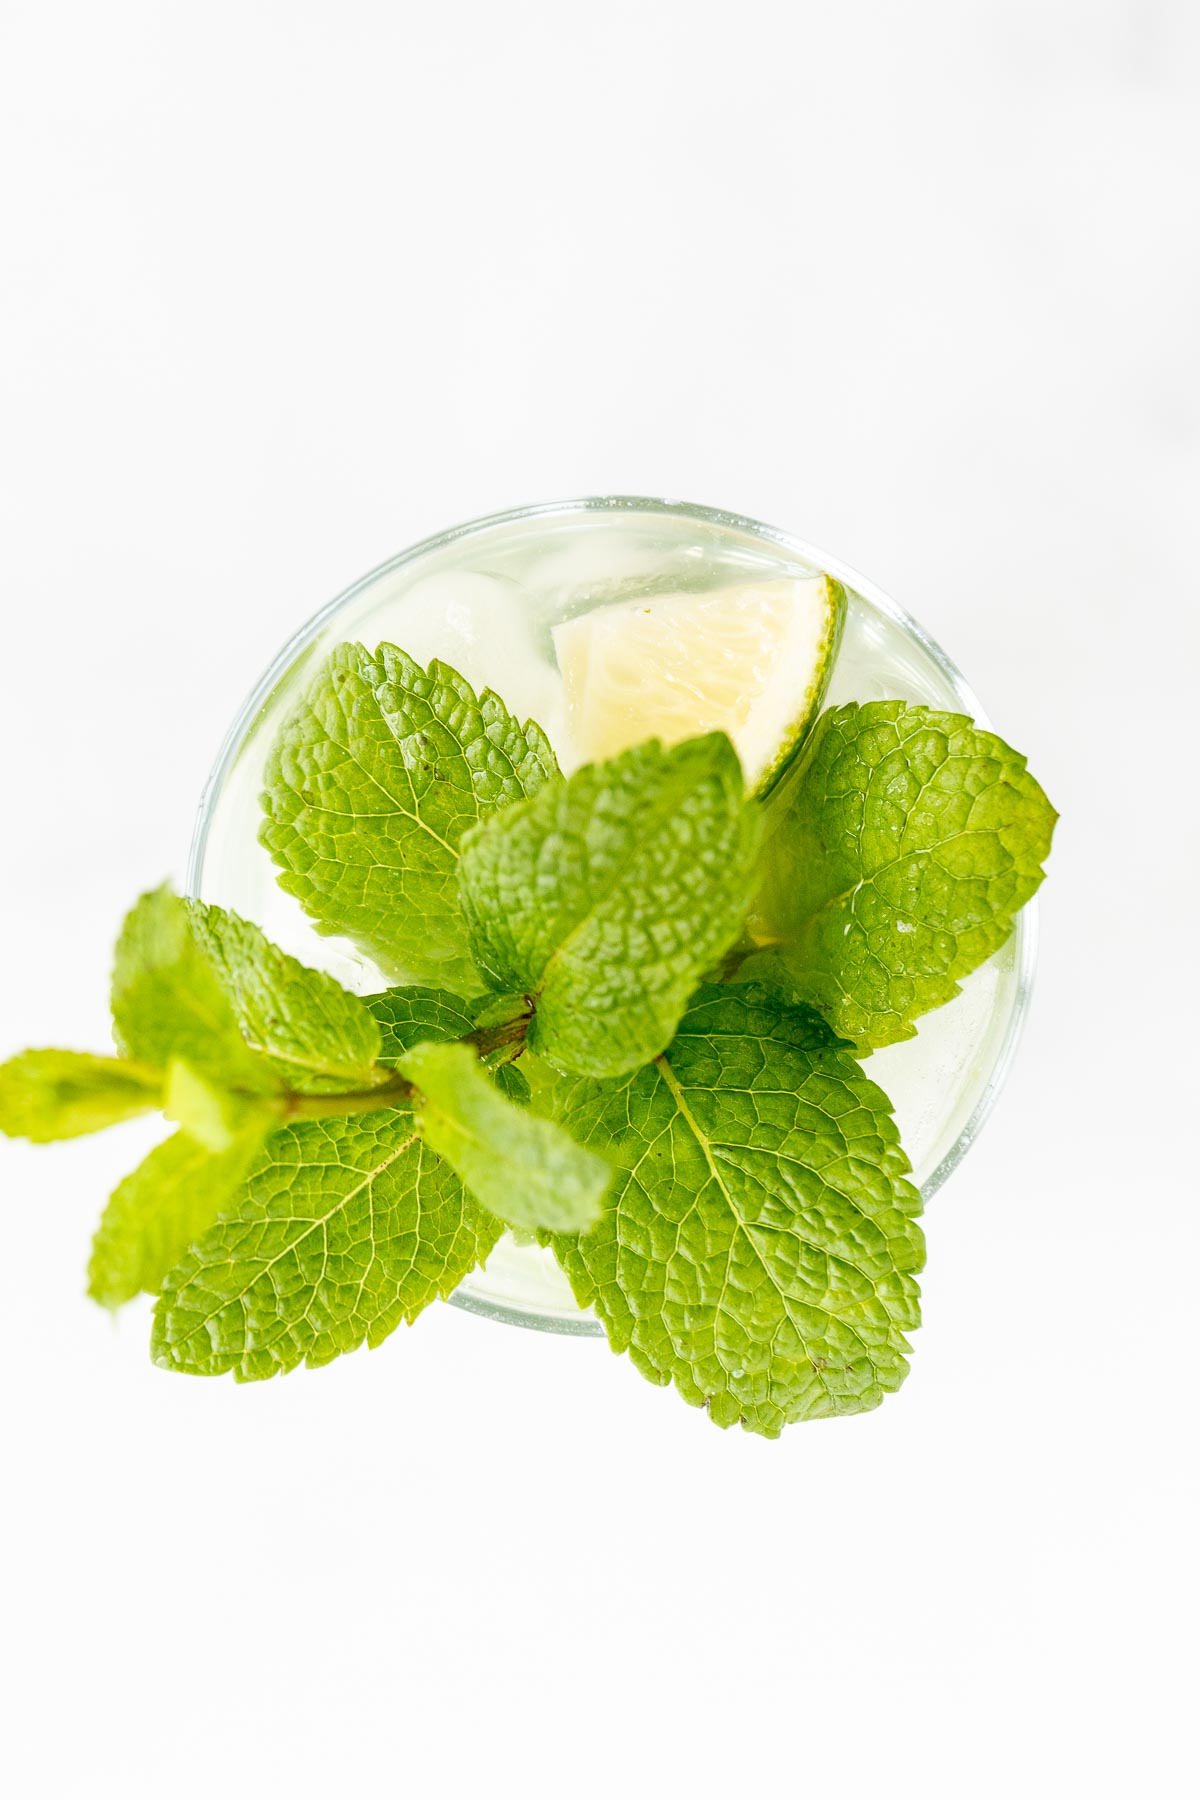 Top view of a glass of tequila mojito with ice cubes, fresh mint leaves, and a slice of lime on a white background.